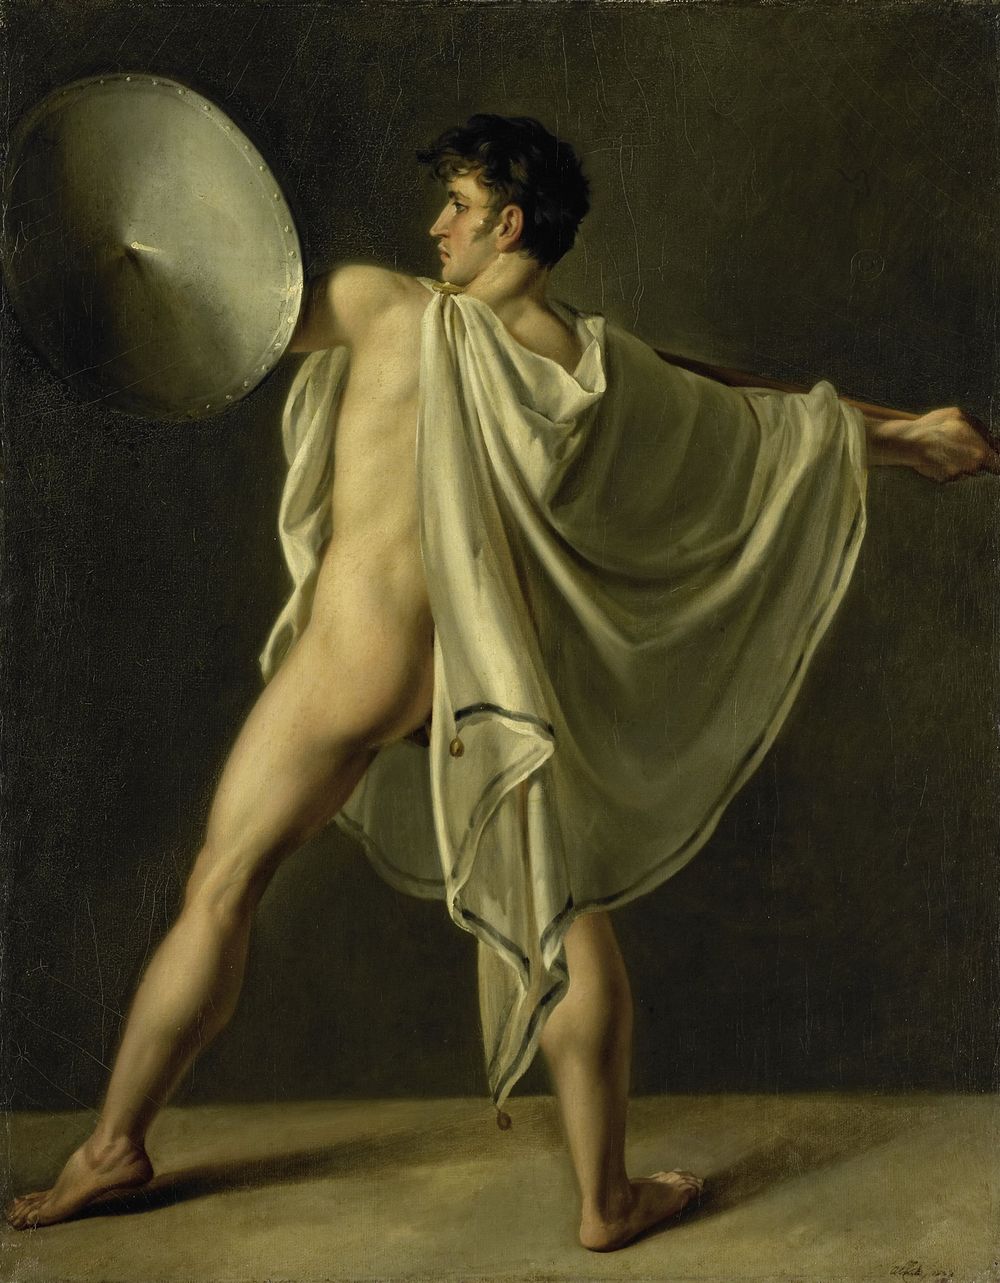 Warrior with Lance and Shield (1808) by Joannes Echarius Carolus Alberti